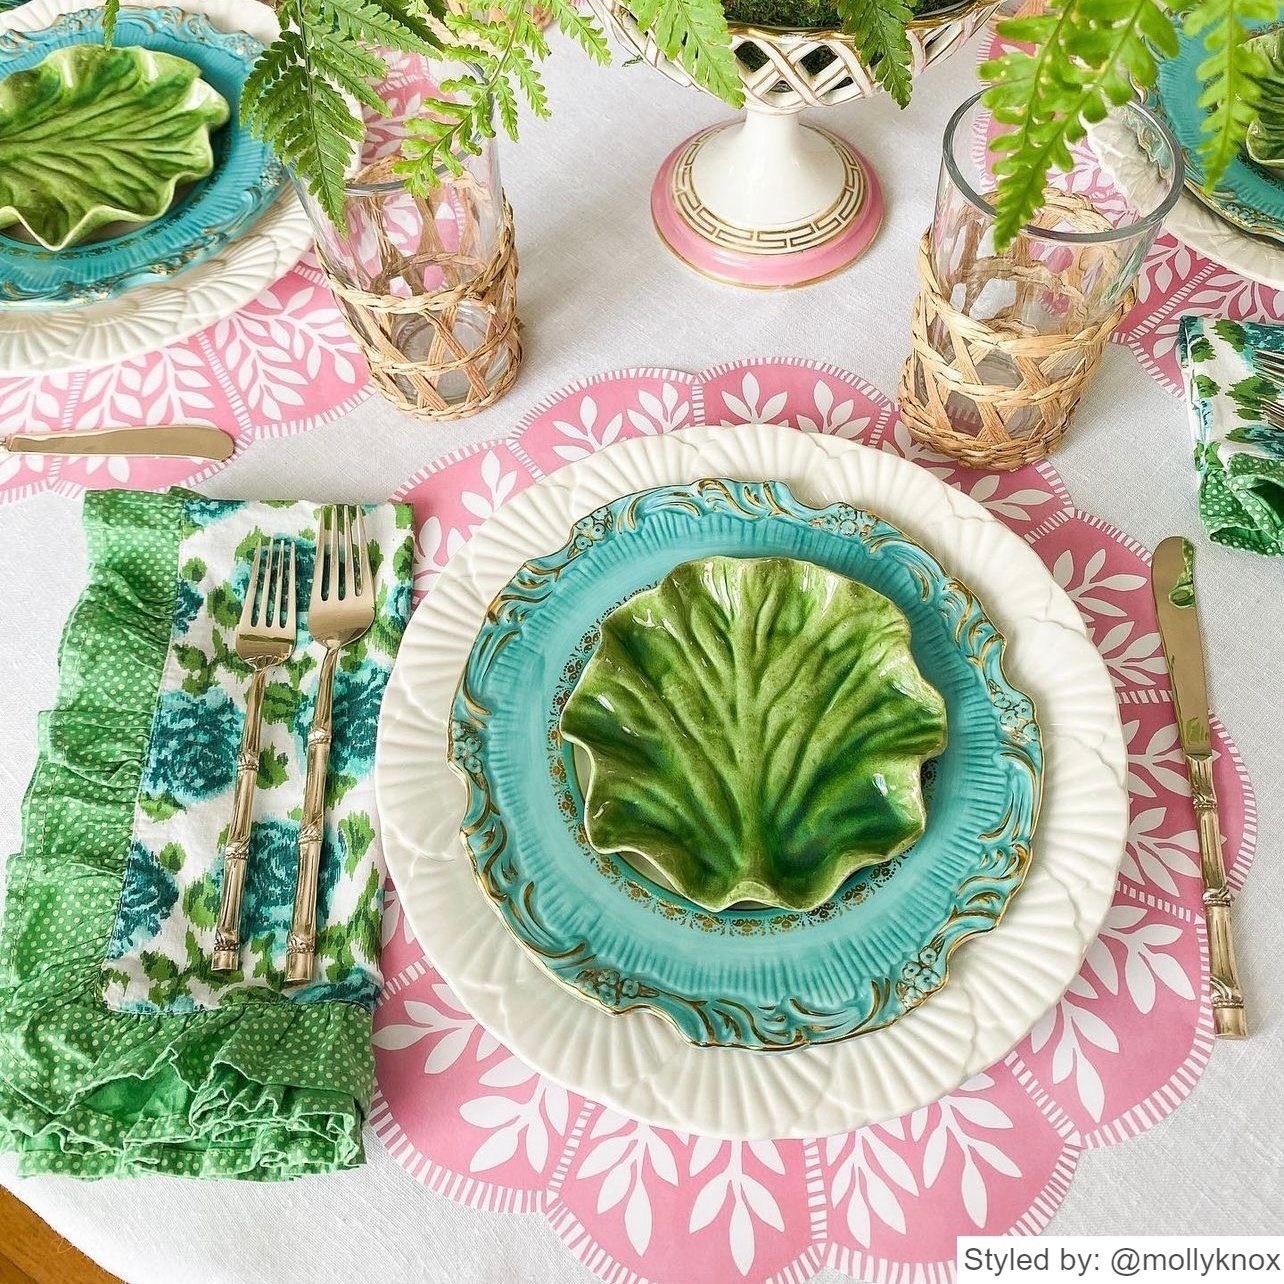 Place setting with a pink and white scalloped round paper placemat layered with green, white and blue dishes on a light pink tablecloth with a blue and green napkin